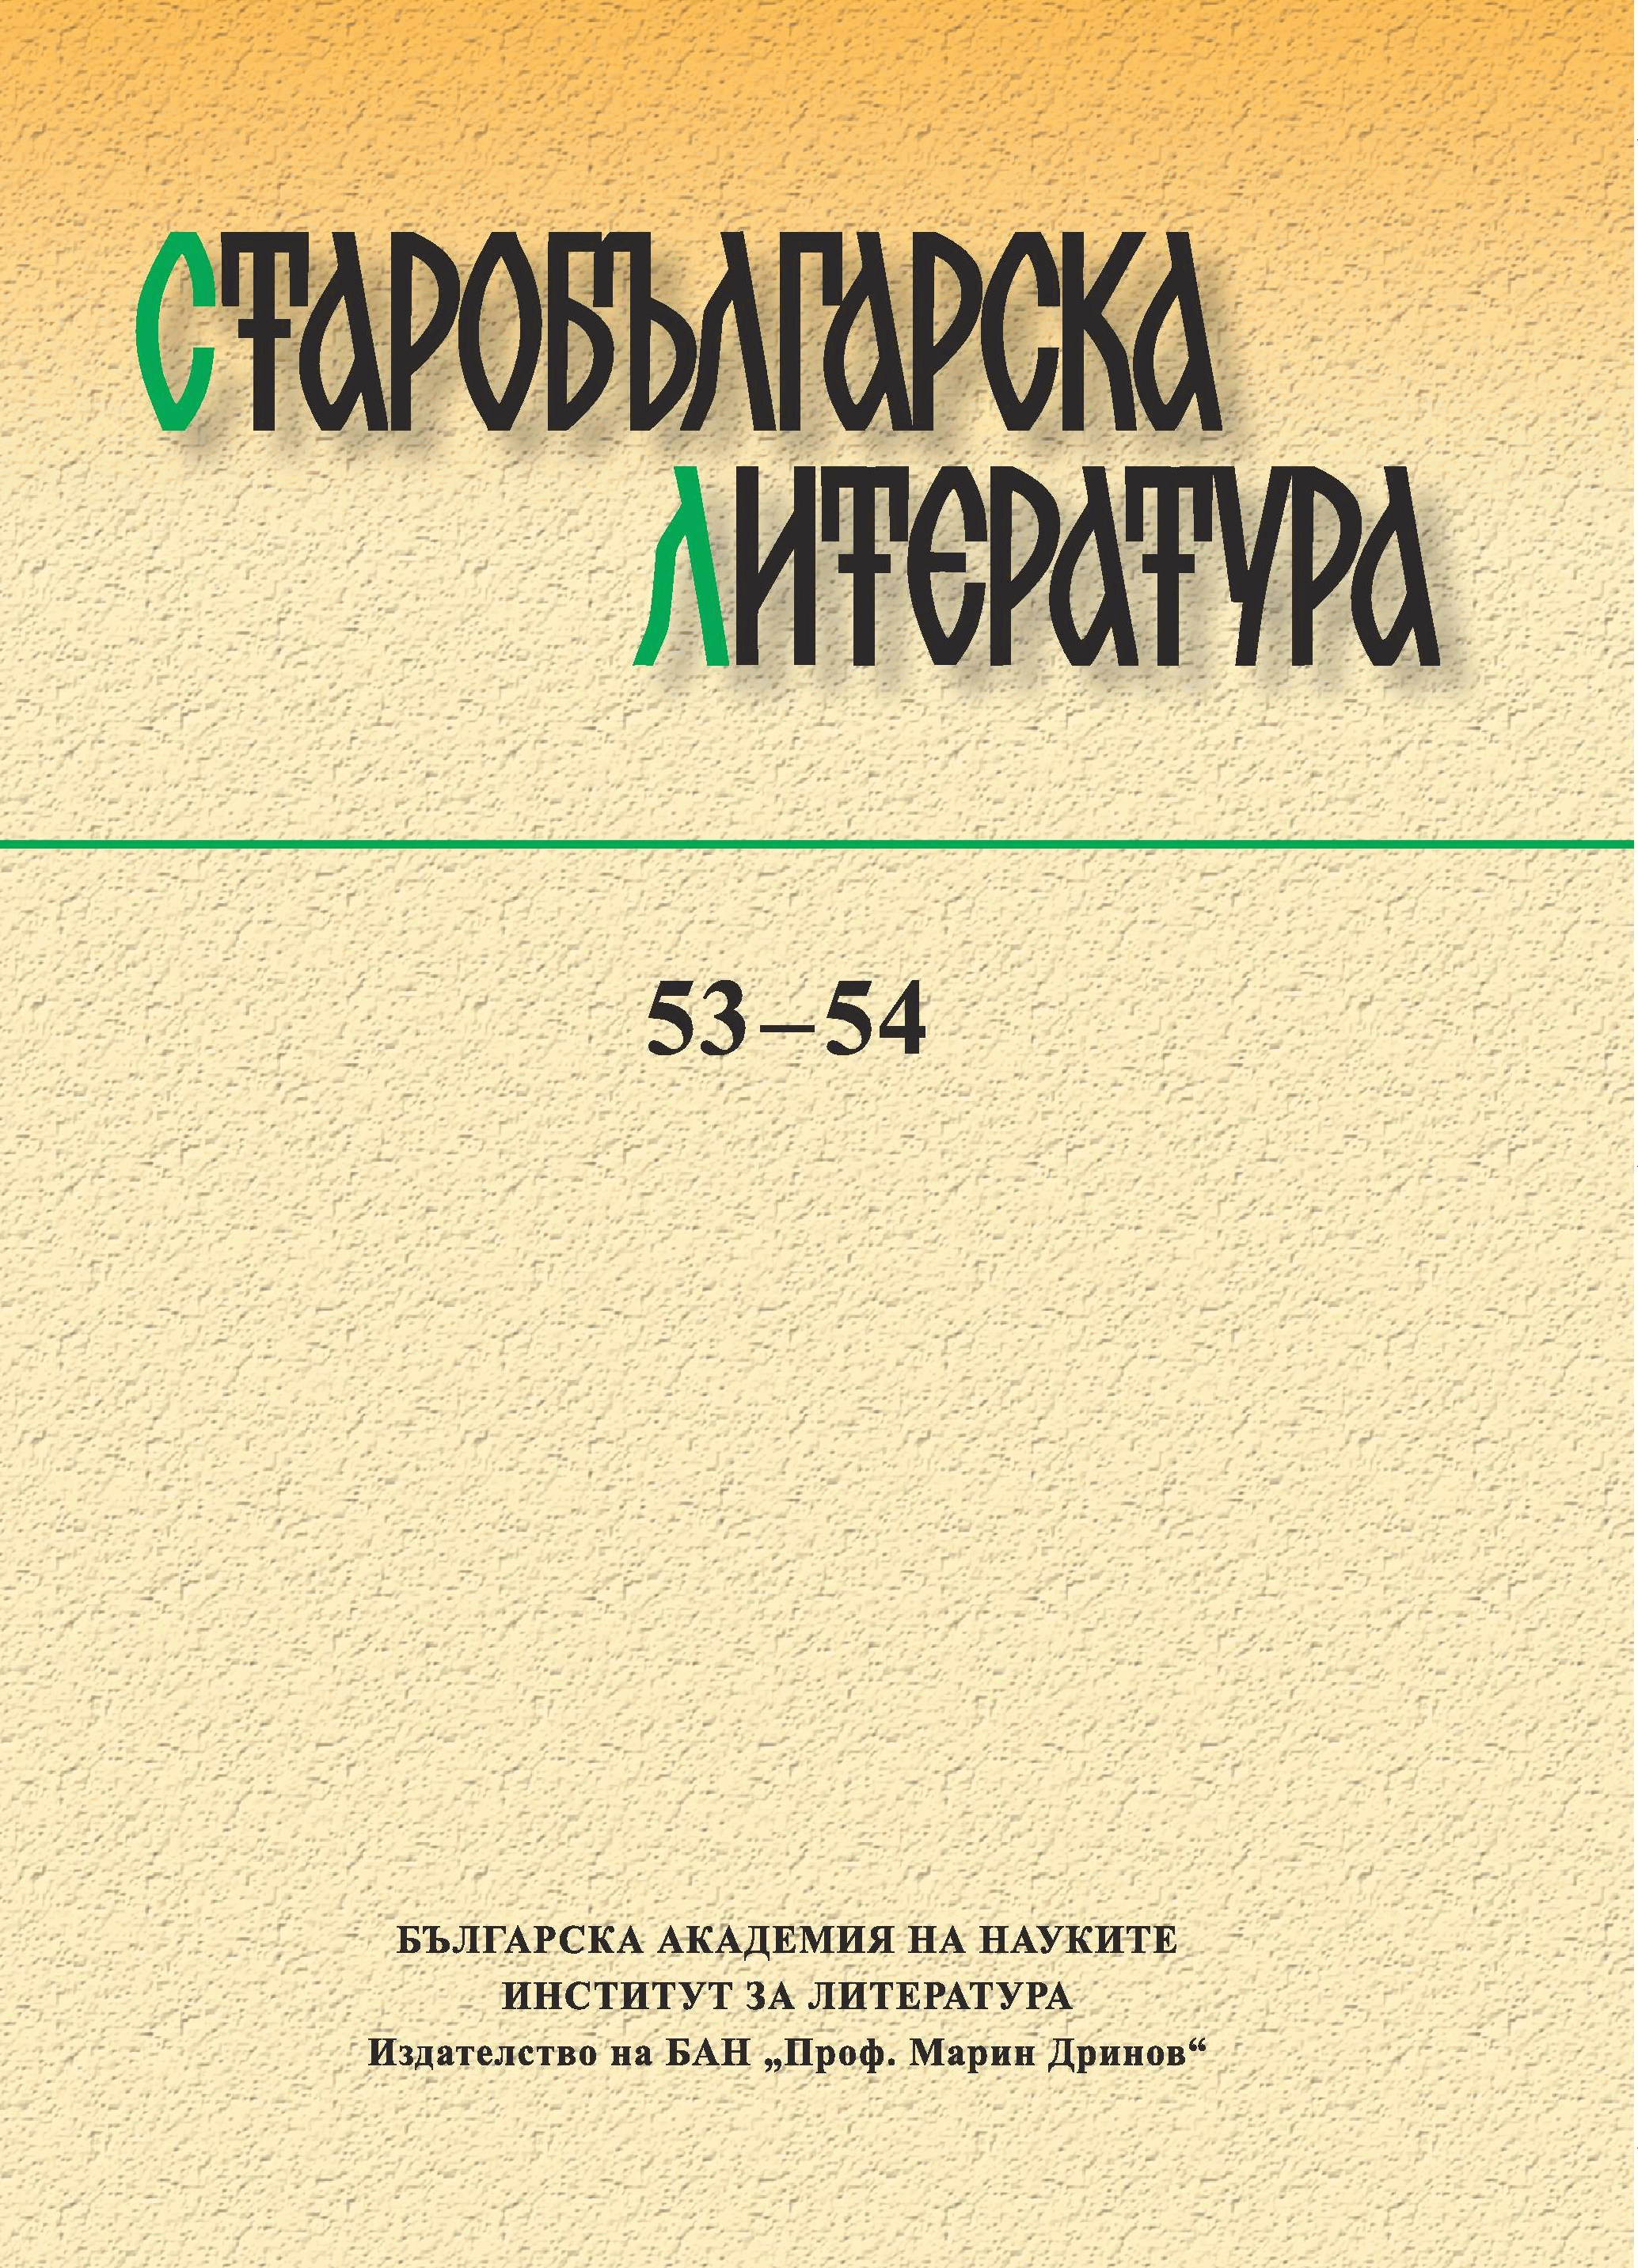 Publications on Old Bulgarian Literature and Culture Published in Bulgaria 2015 Cover Image